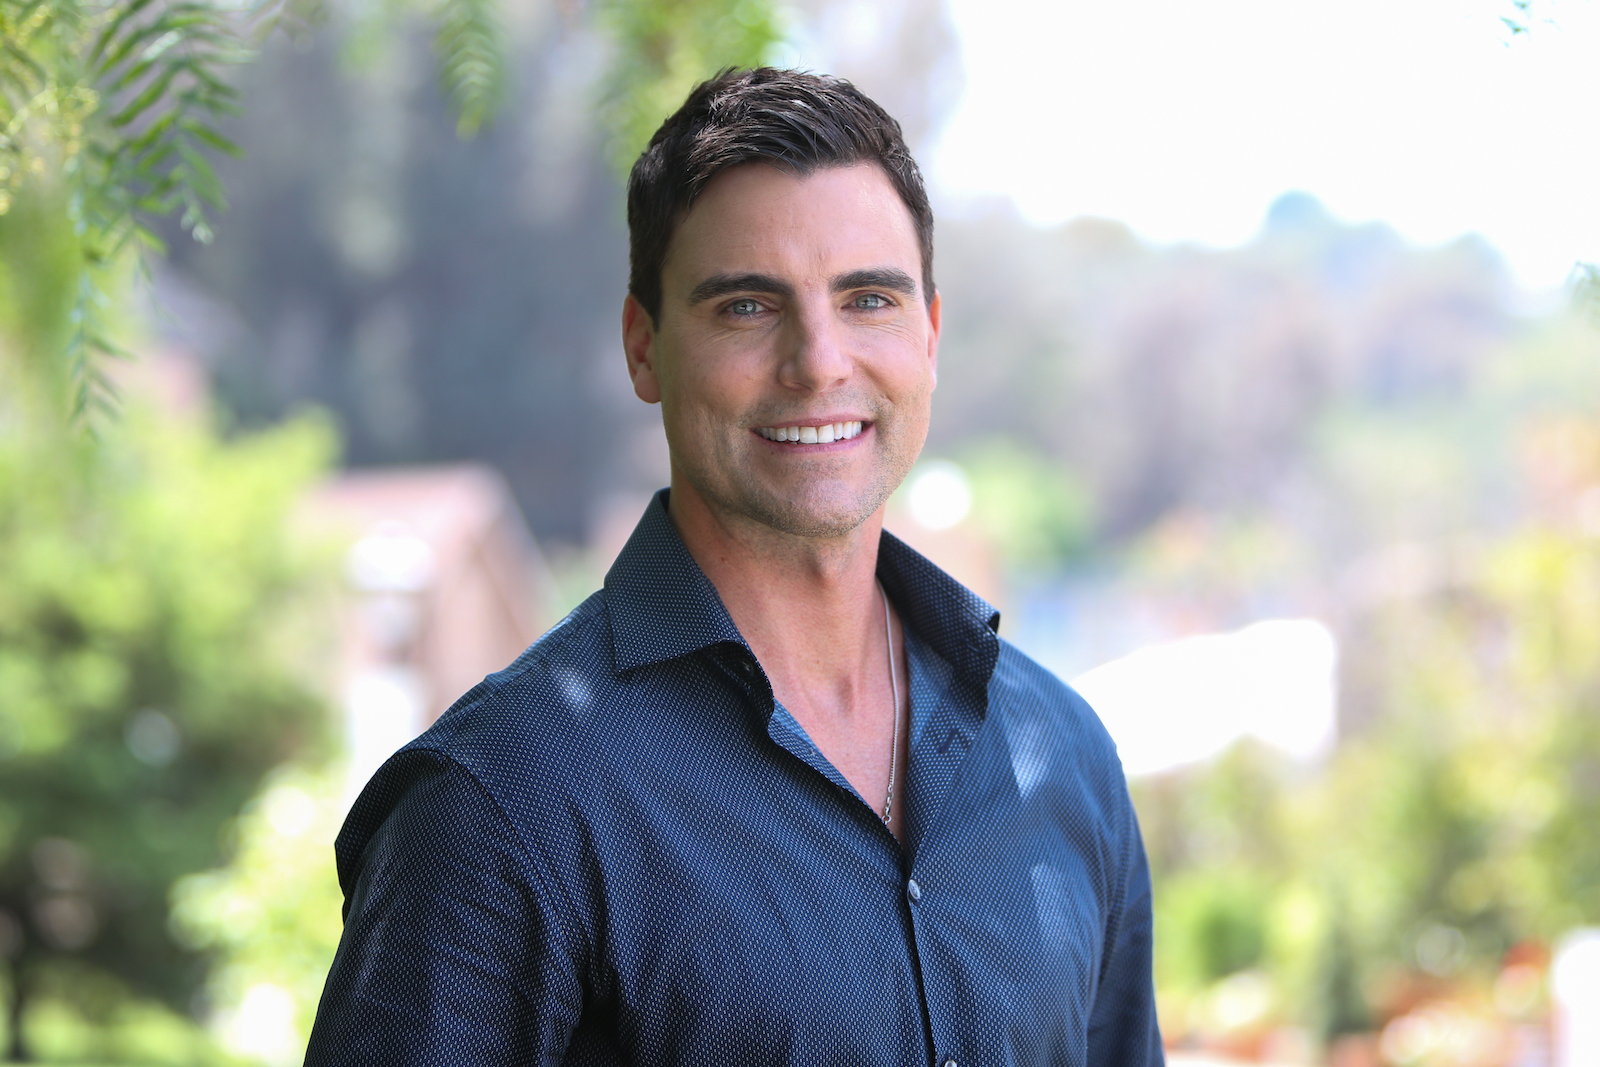 Something Borrowed Colin Egglesfield has a resemblance to actor Tom Cruise